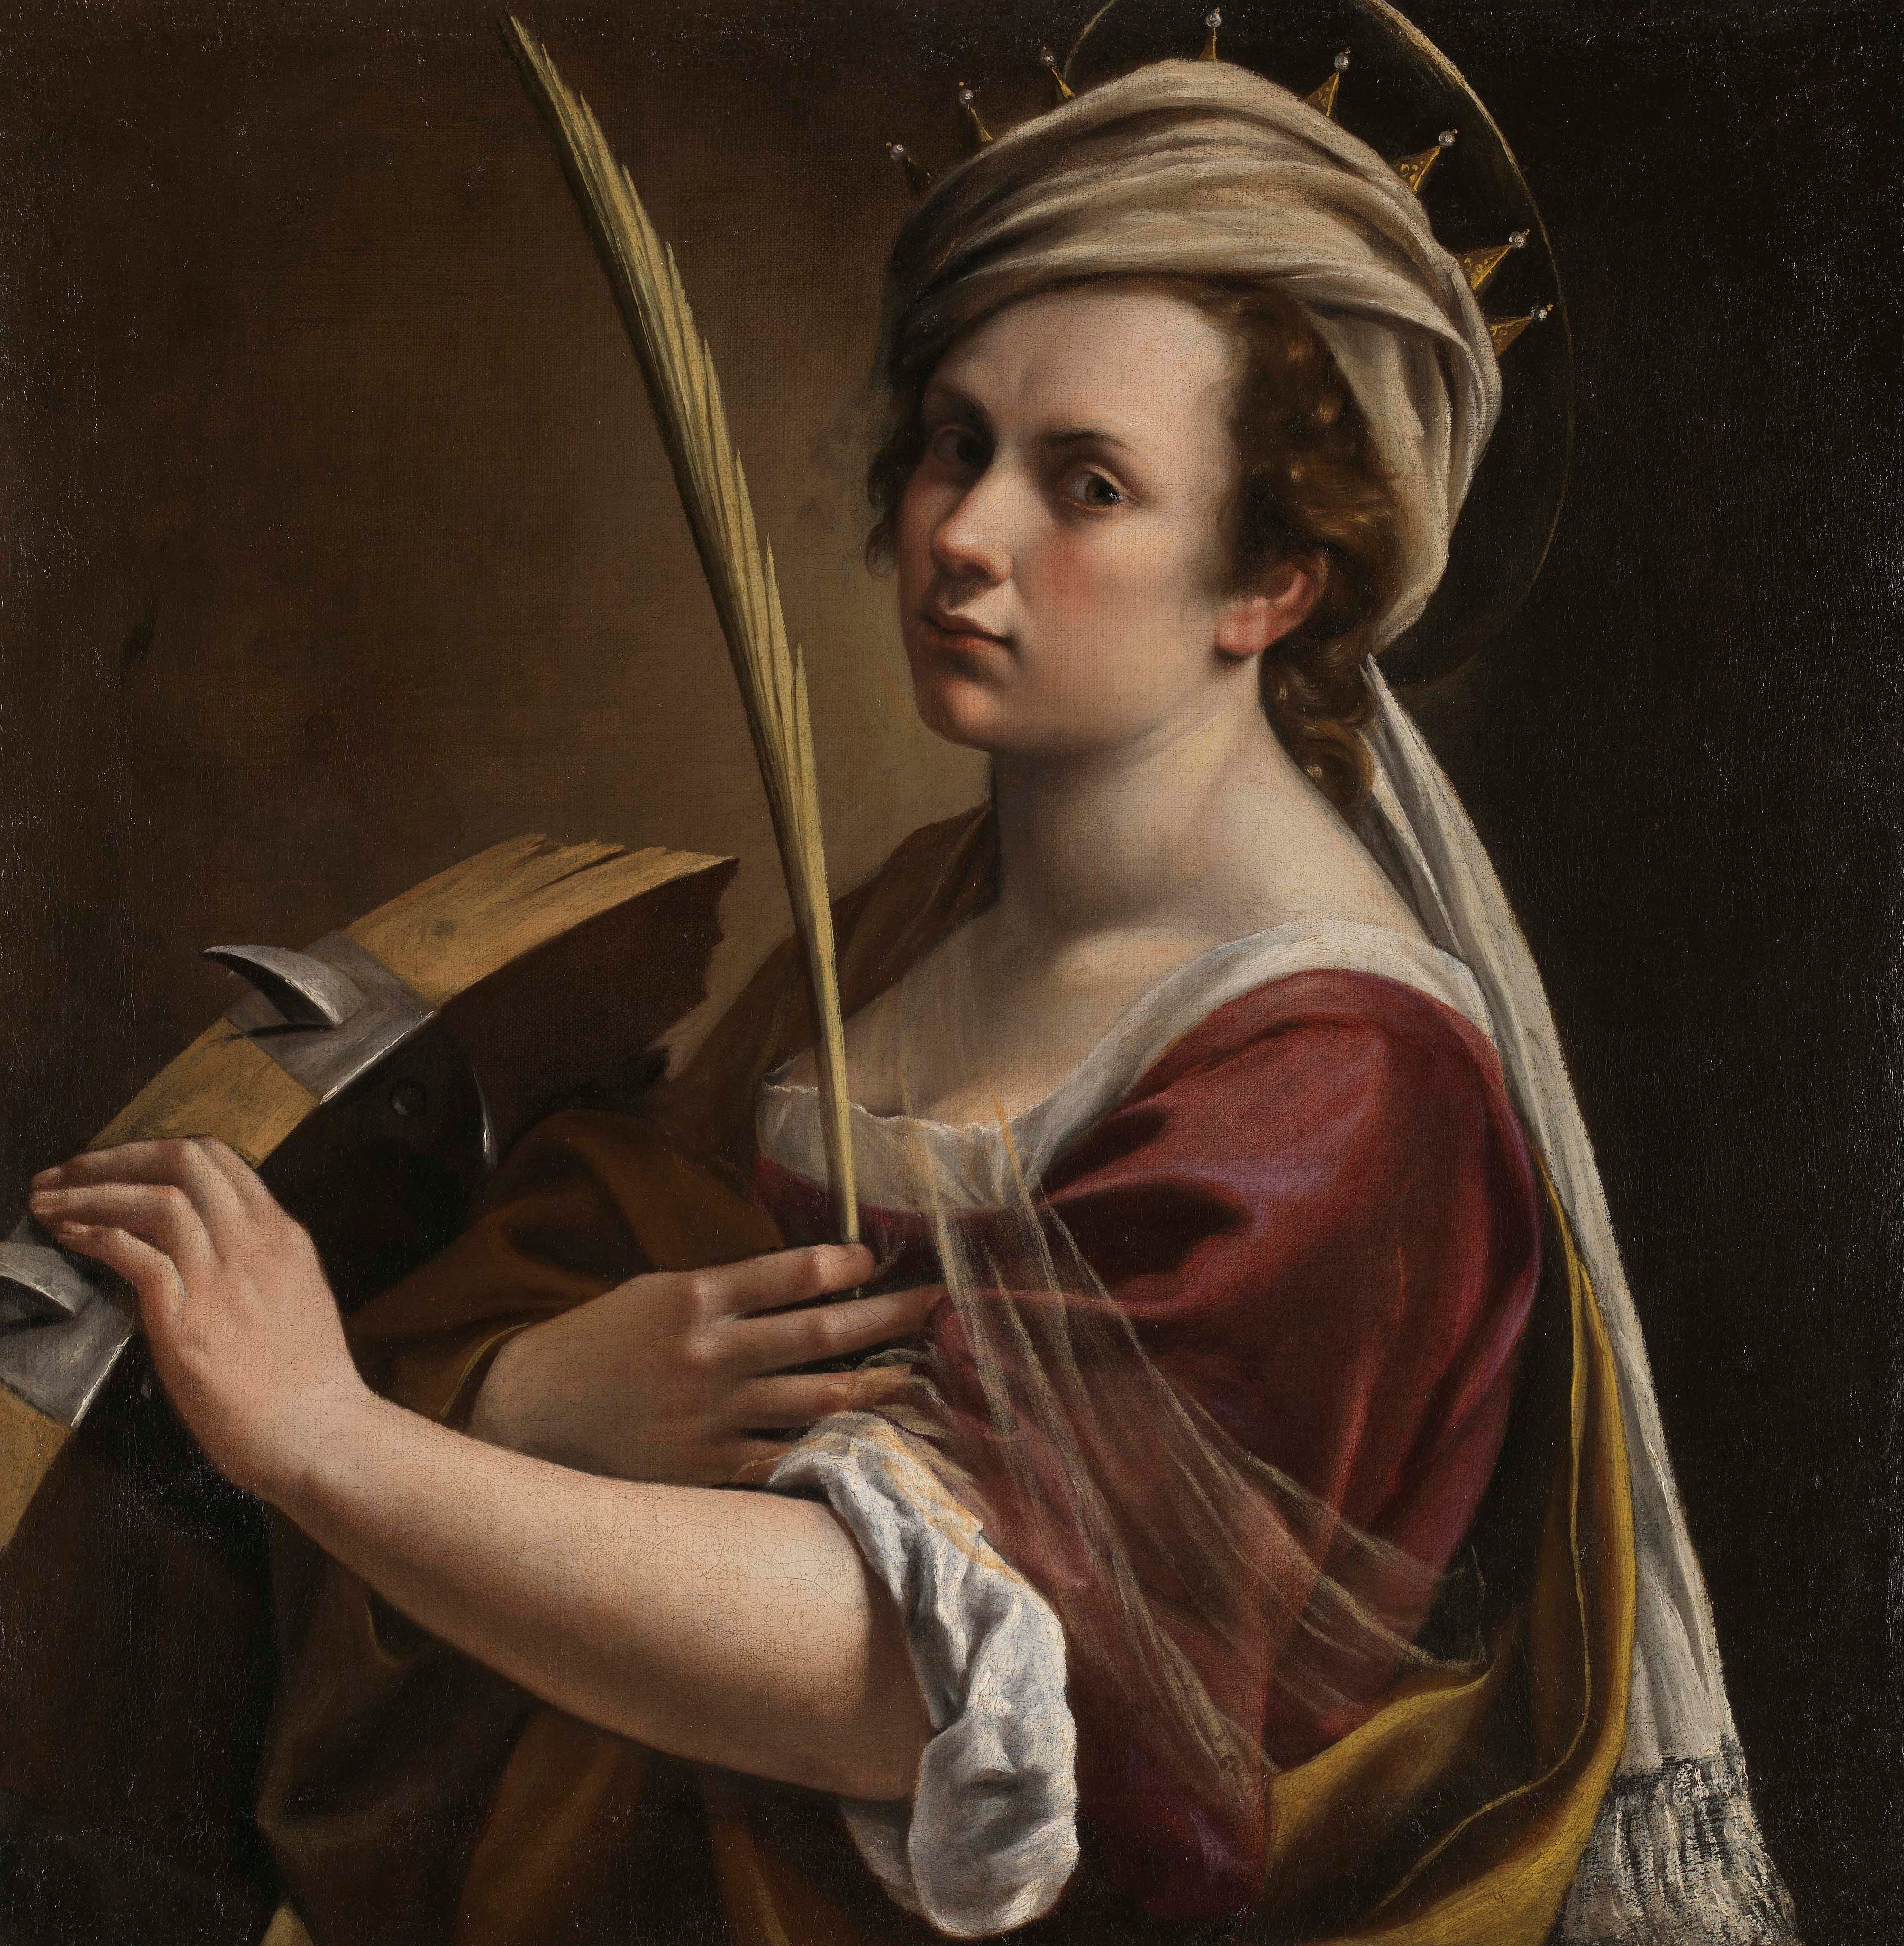 Artemisia Gentileschi (Italian, 1593–1654 or later), "Self-Portrait as Saint Catherine of Alexandria," 1615–1617, Oil on canvas. The National Gallery, London, Bought with the support of the American Friends of the National Gallery